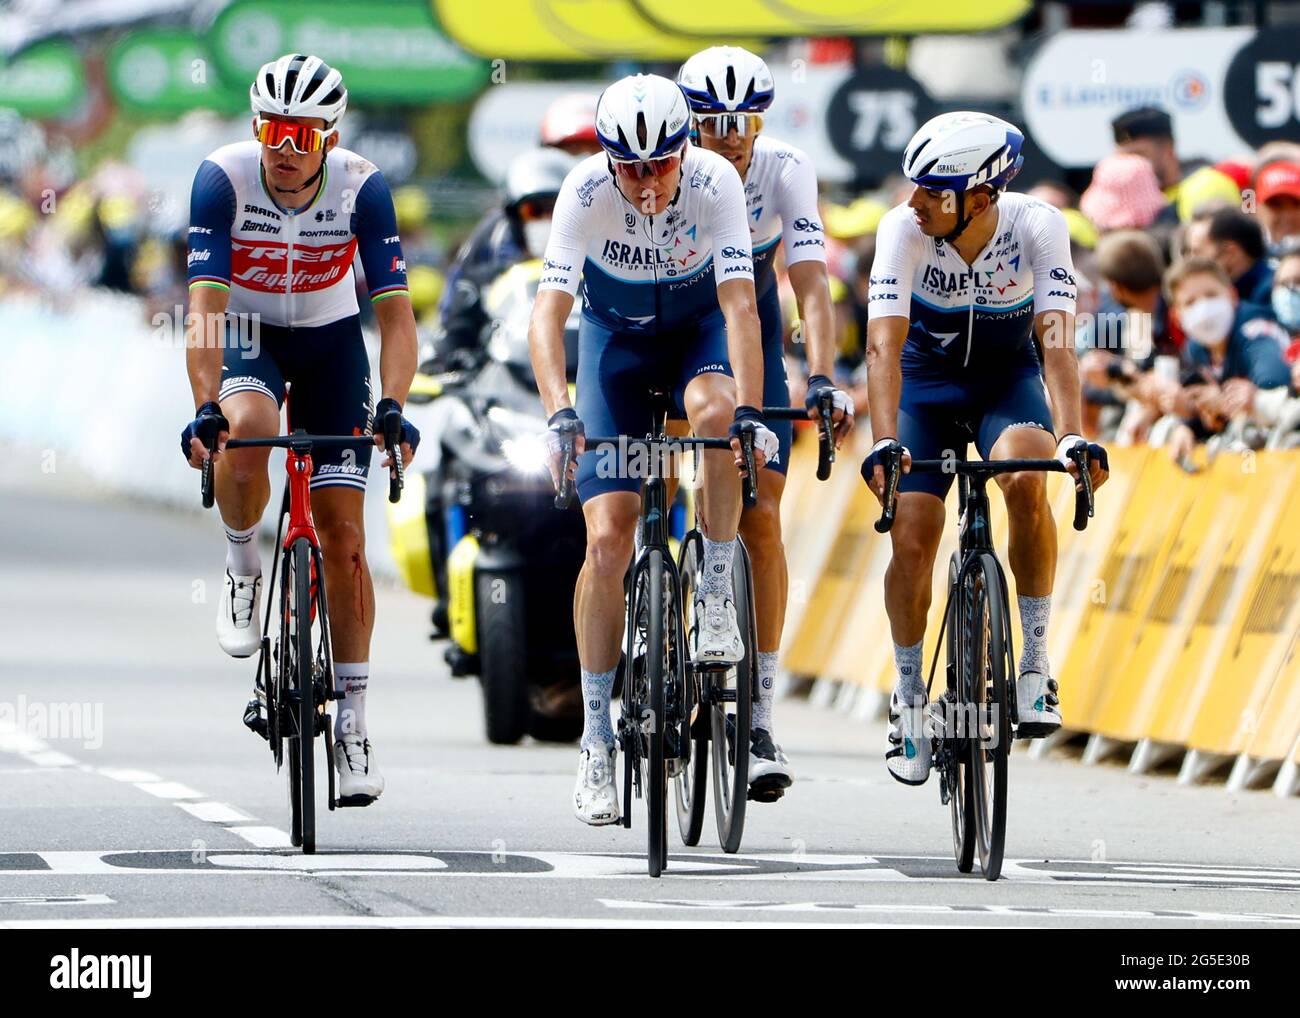 BREST to LANDERNEAU, France, 26th June 2021, Chris Froome crosses the finish line after getting caught in a large crash during  stage 1 of the 2021 tour de france , Credit:Pool/Jan De Meuleneir/Goding images/Alamy Live News Stock Photo